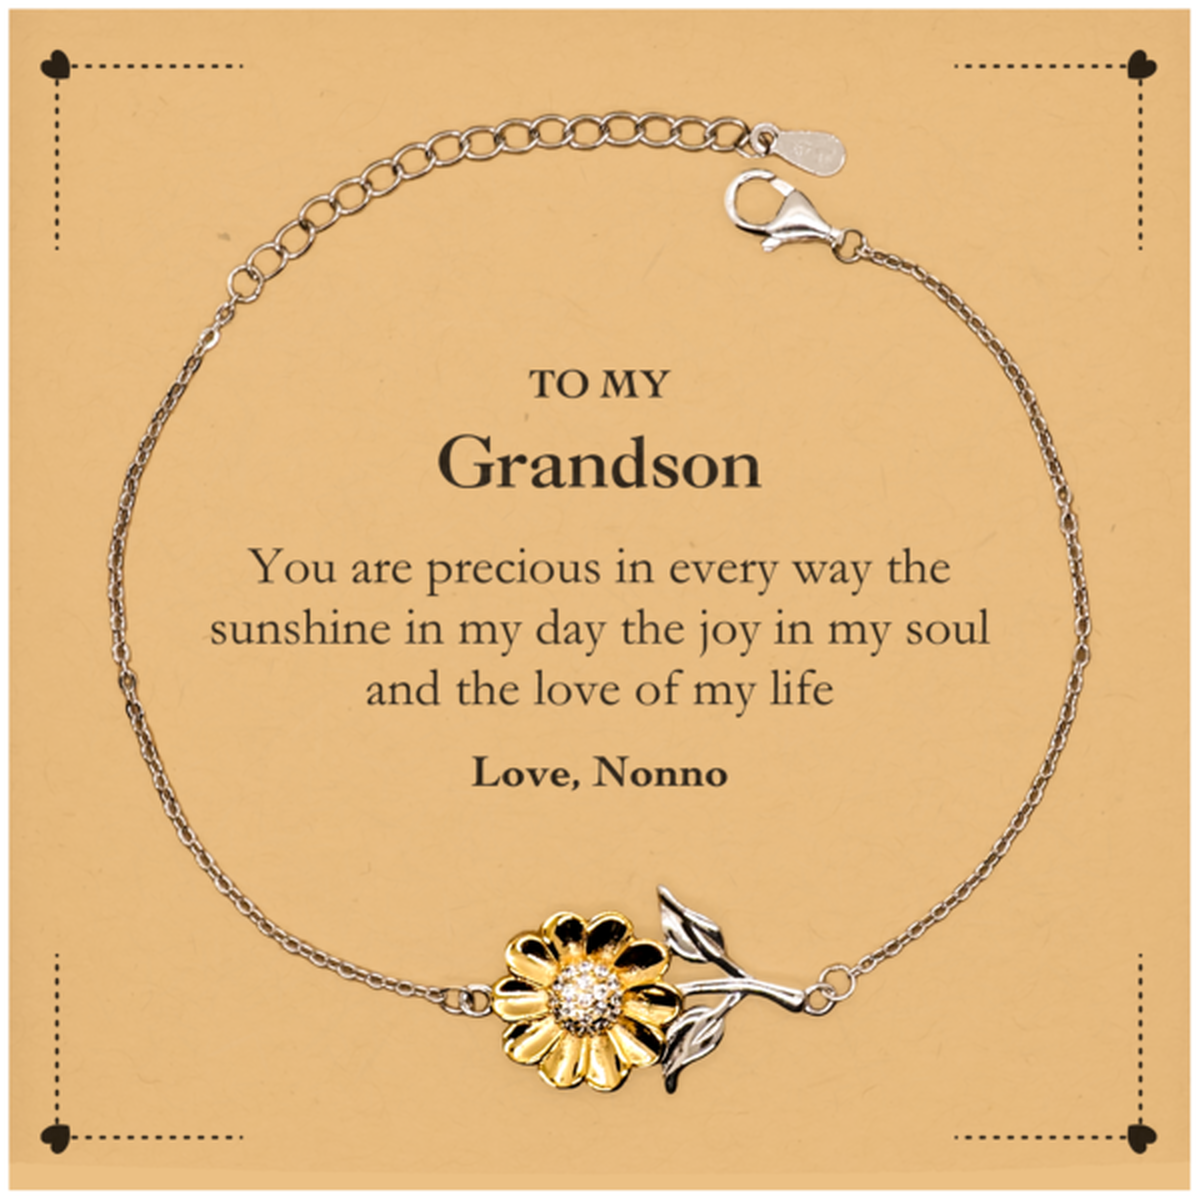 Graduation Gifts for Grandson Sunflower Bracelet Present from Nonno, Christmas Grandson Birthday Gifts Grandson You are precious in every way the sunshine in my day. Love, Nonno